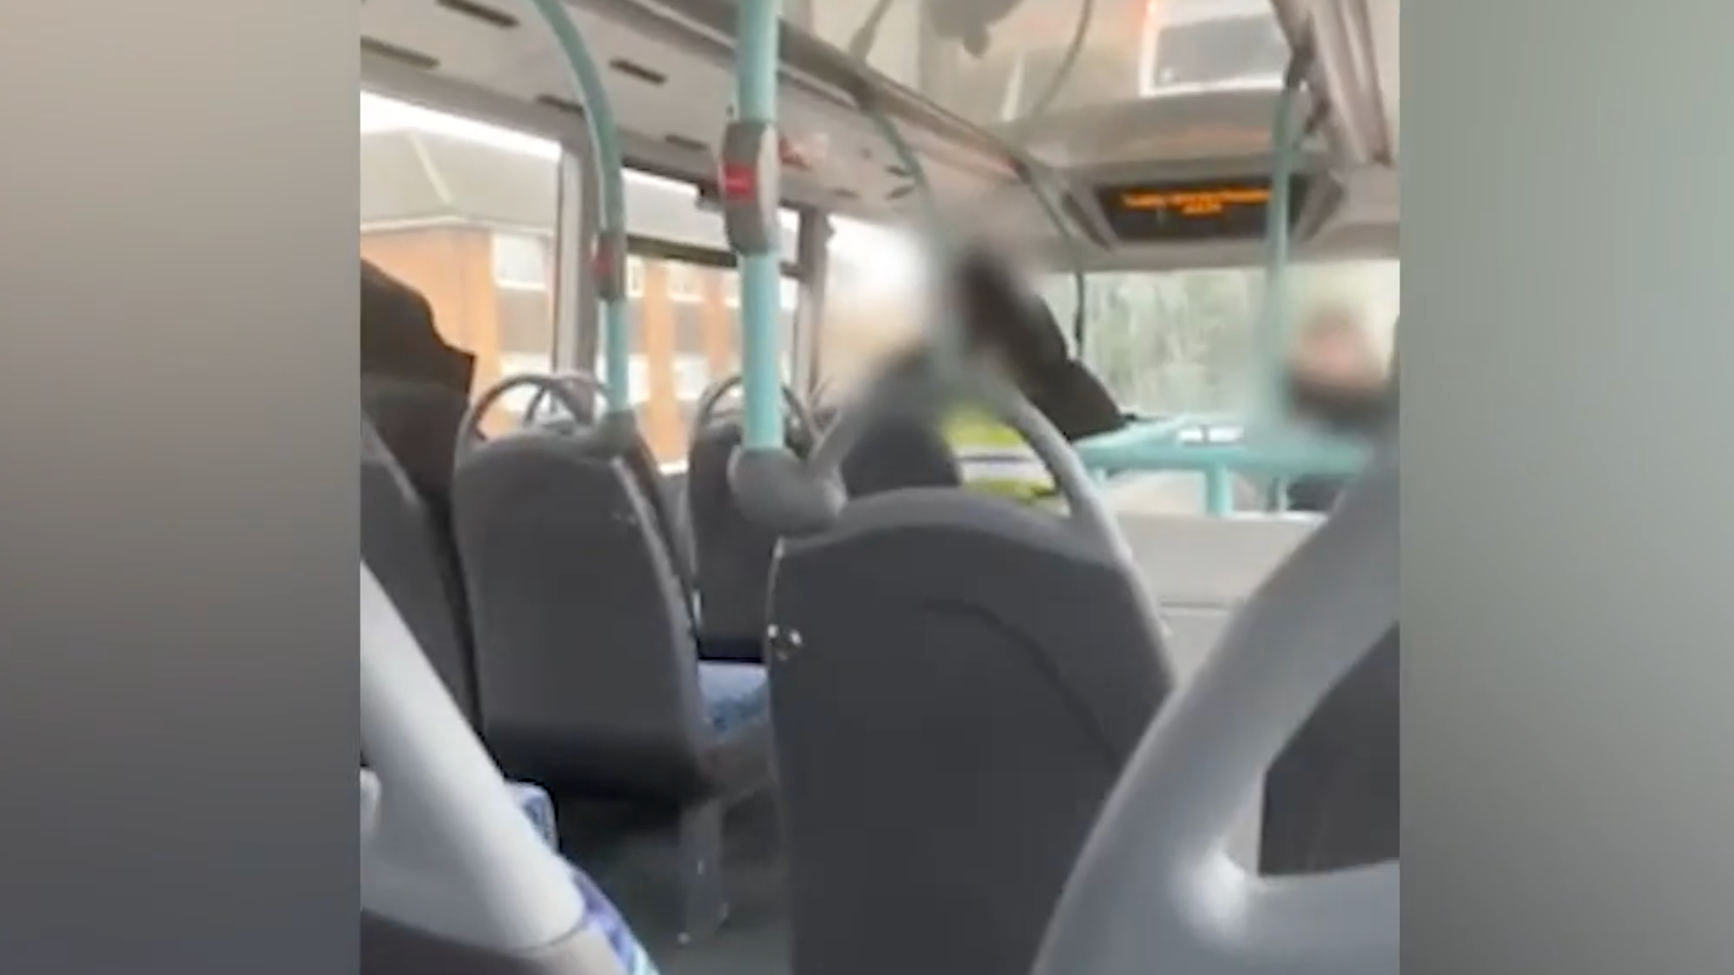 School Bus Xxxnx - Schoolgirl, 13, 'punched and kicked by woman' in terrifying West London bus  attack | ITV News London